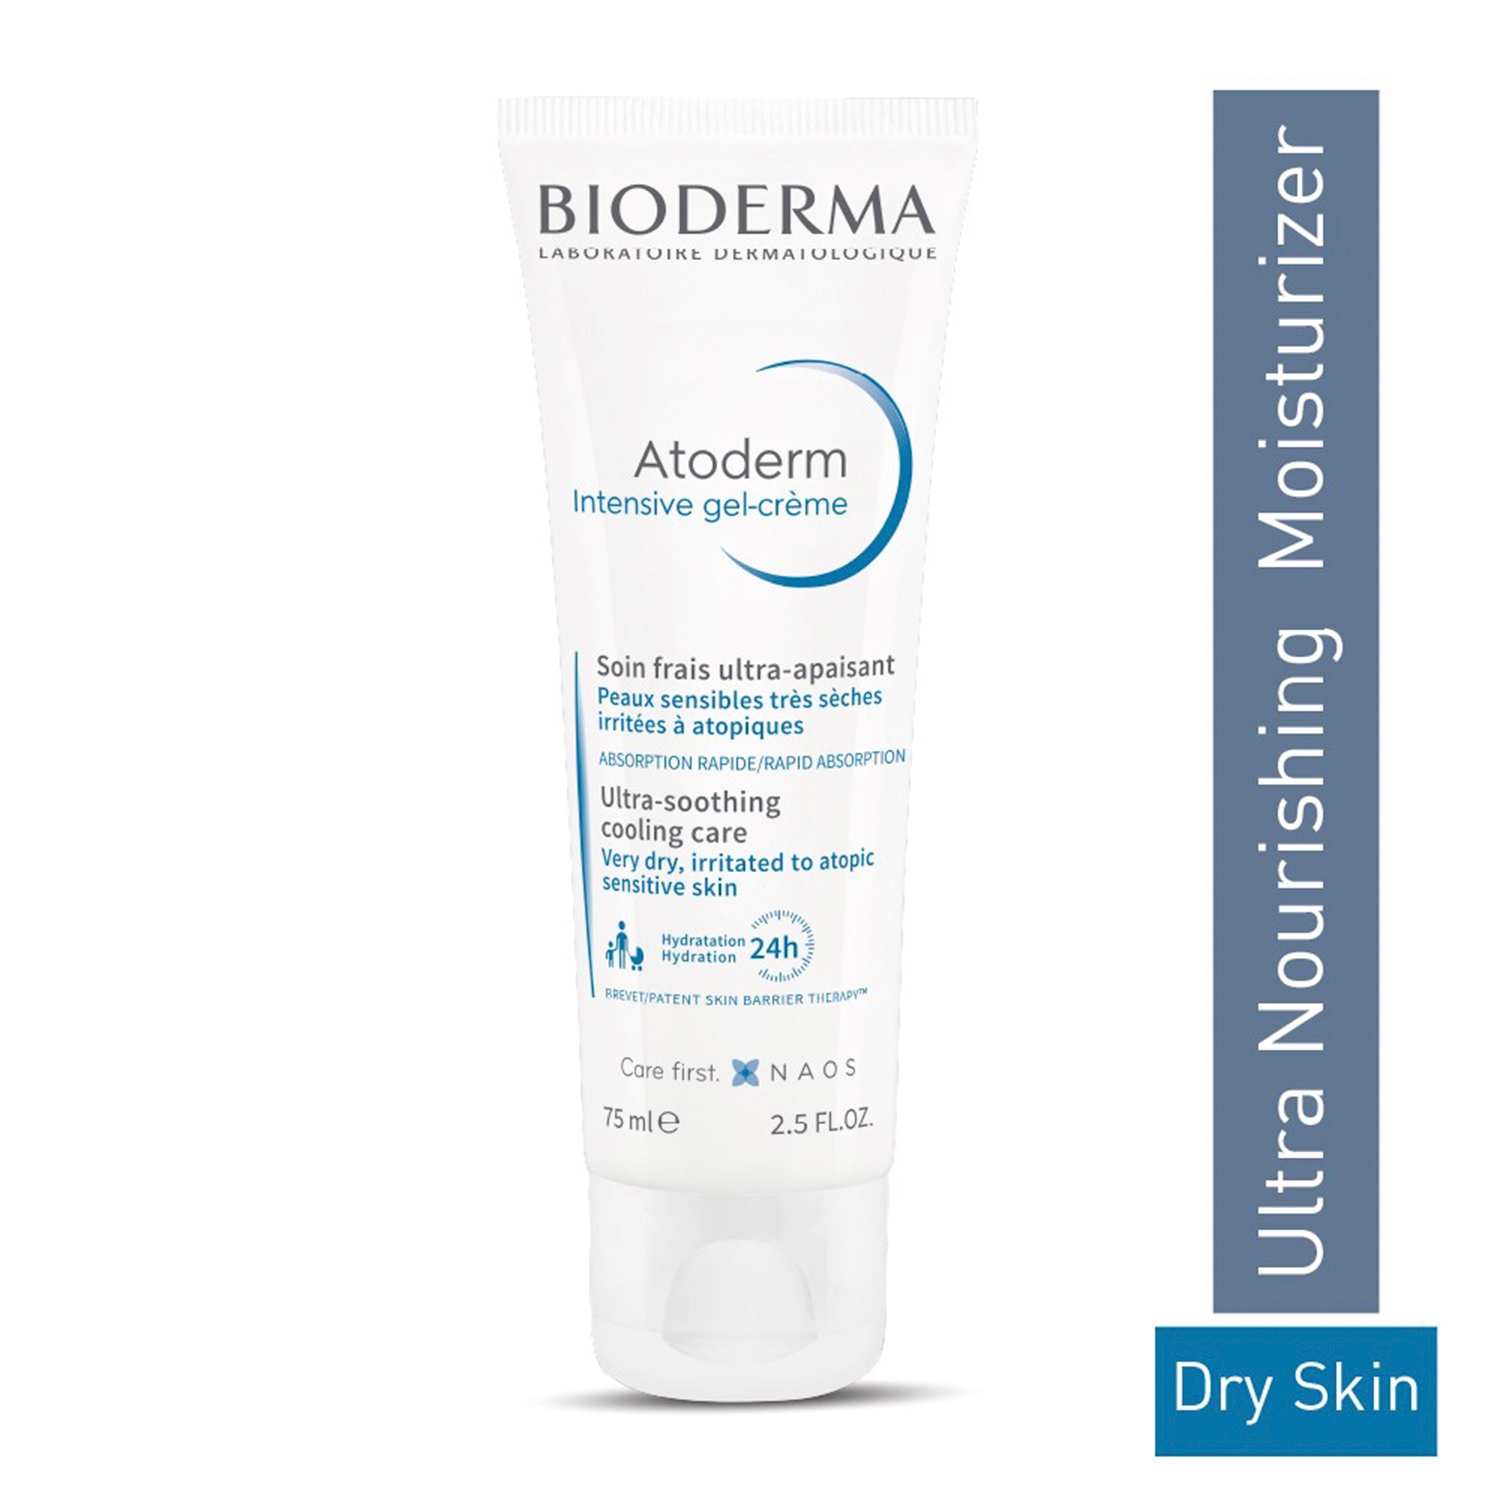 Buy Bioderma skincare products online